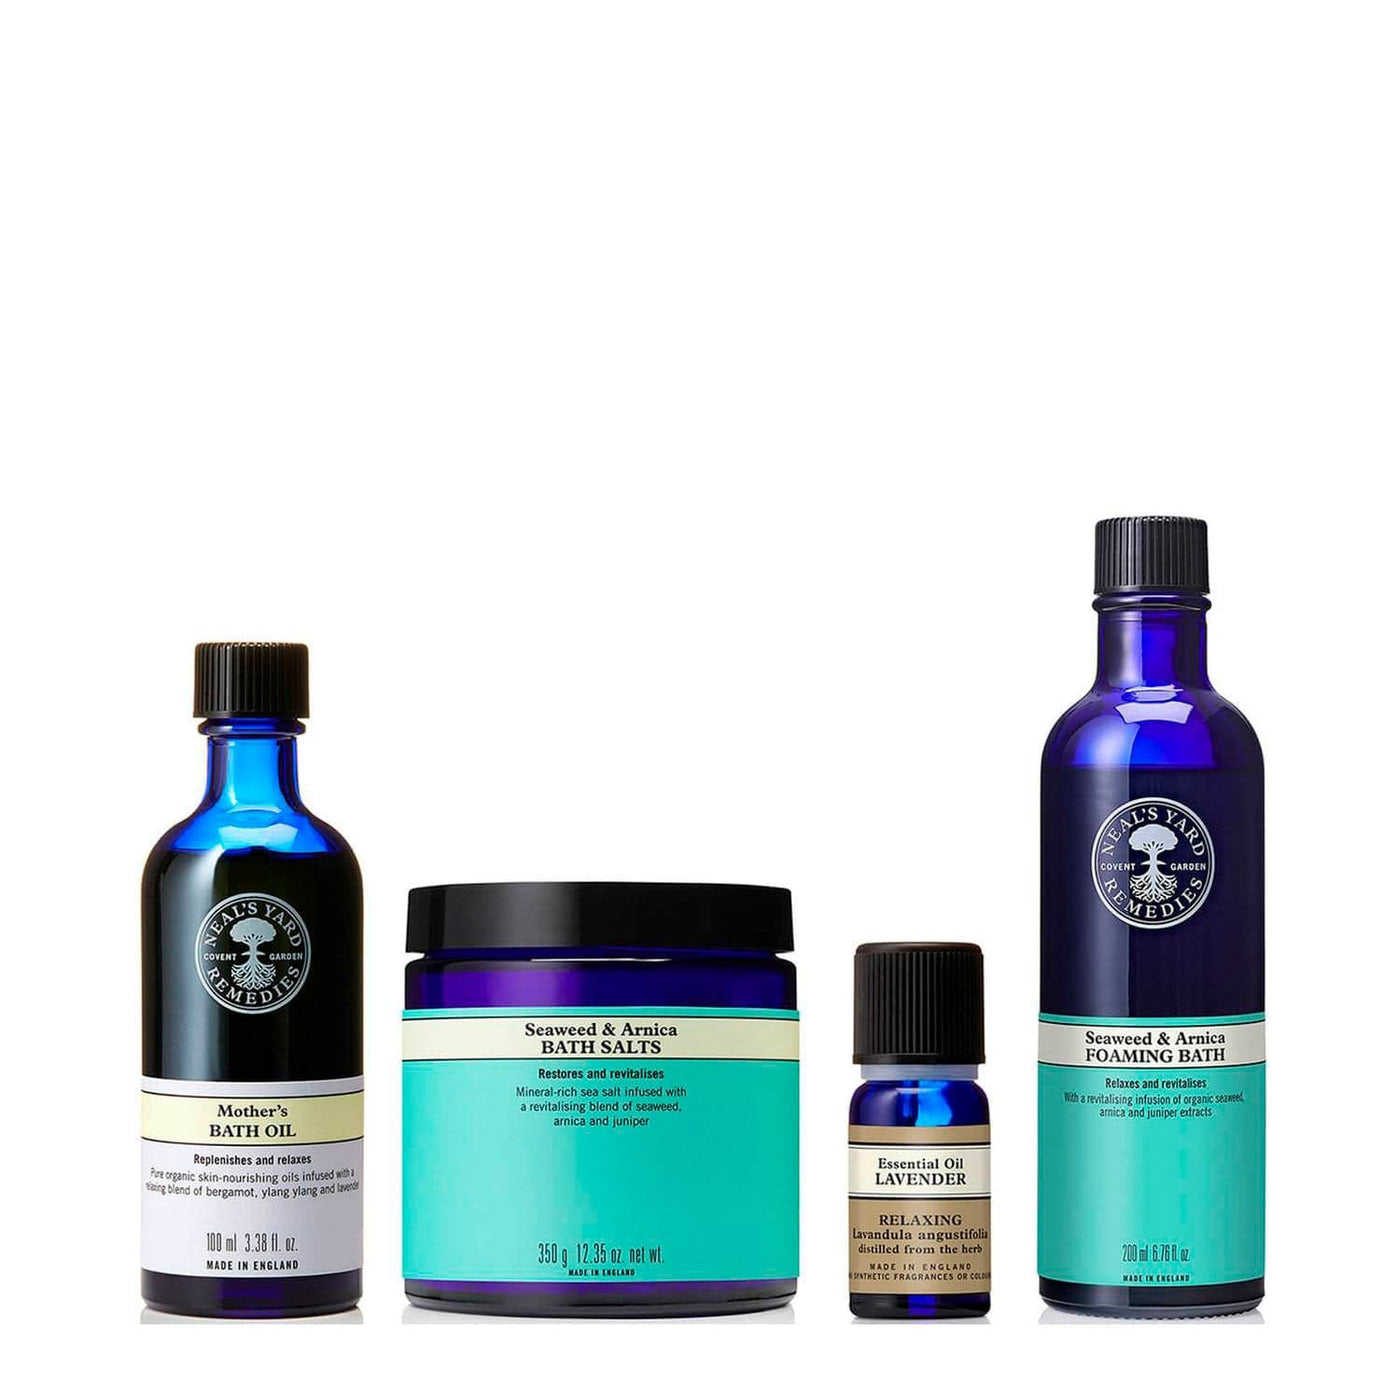 Neal's Yard Remedies Gifts & Collections Mums Bath Time Escape